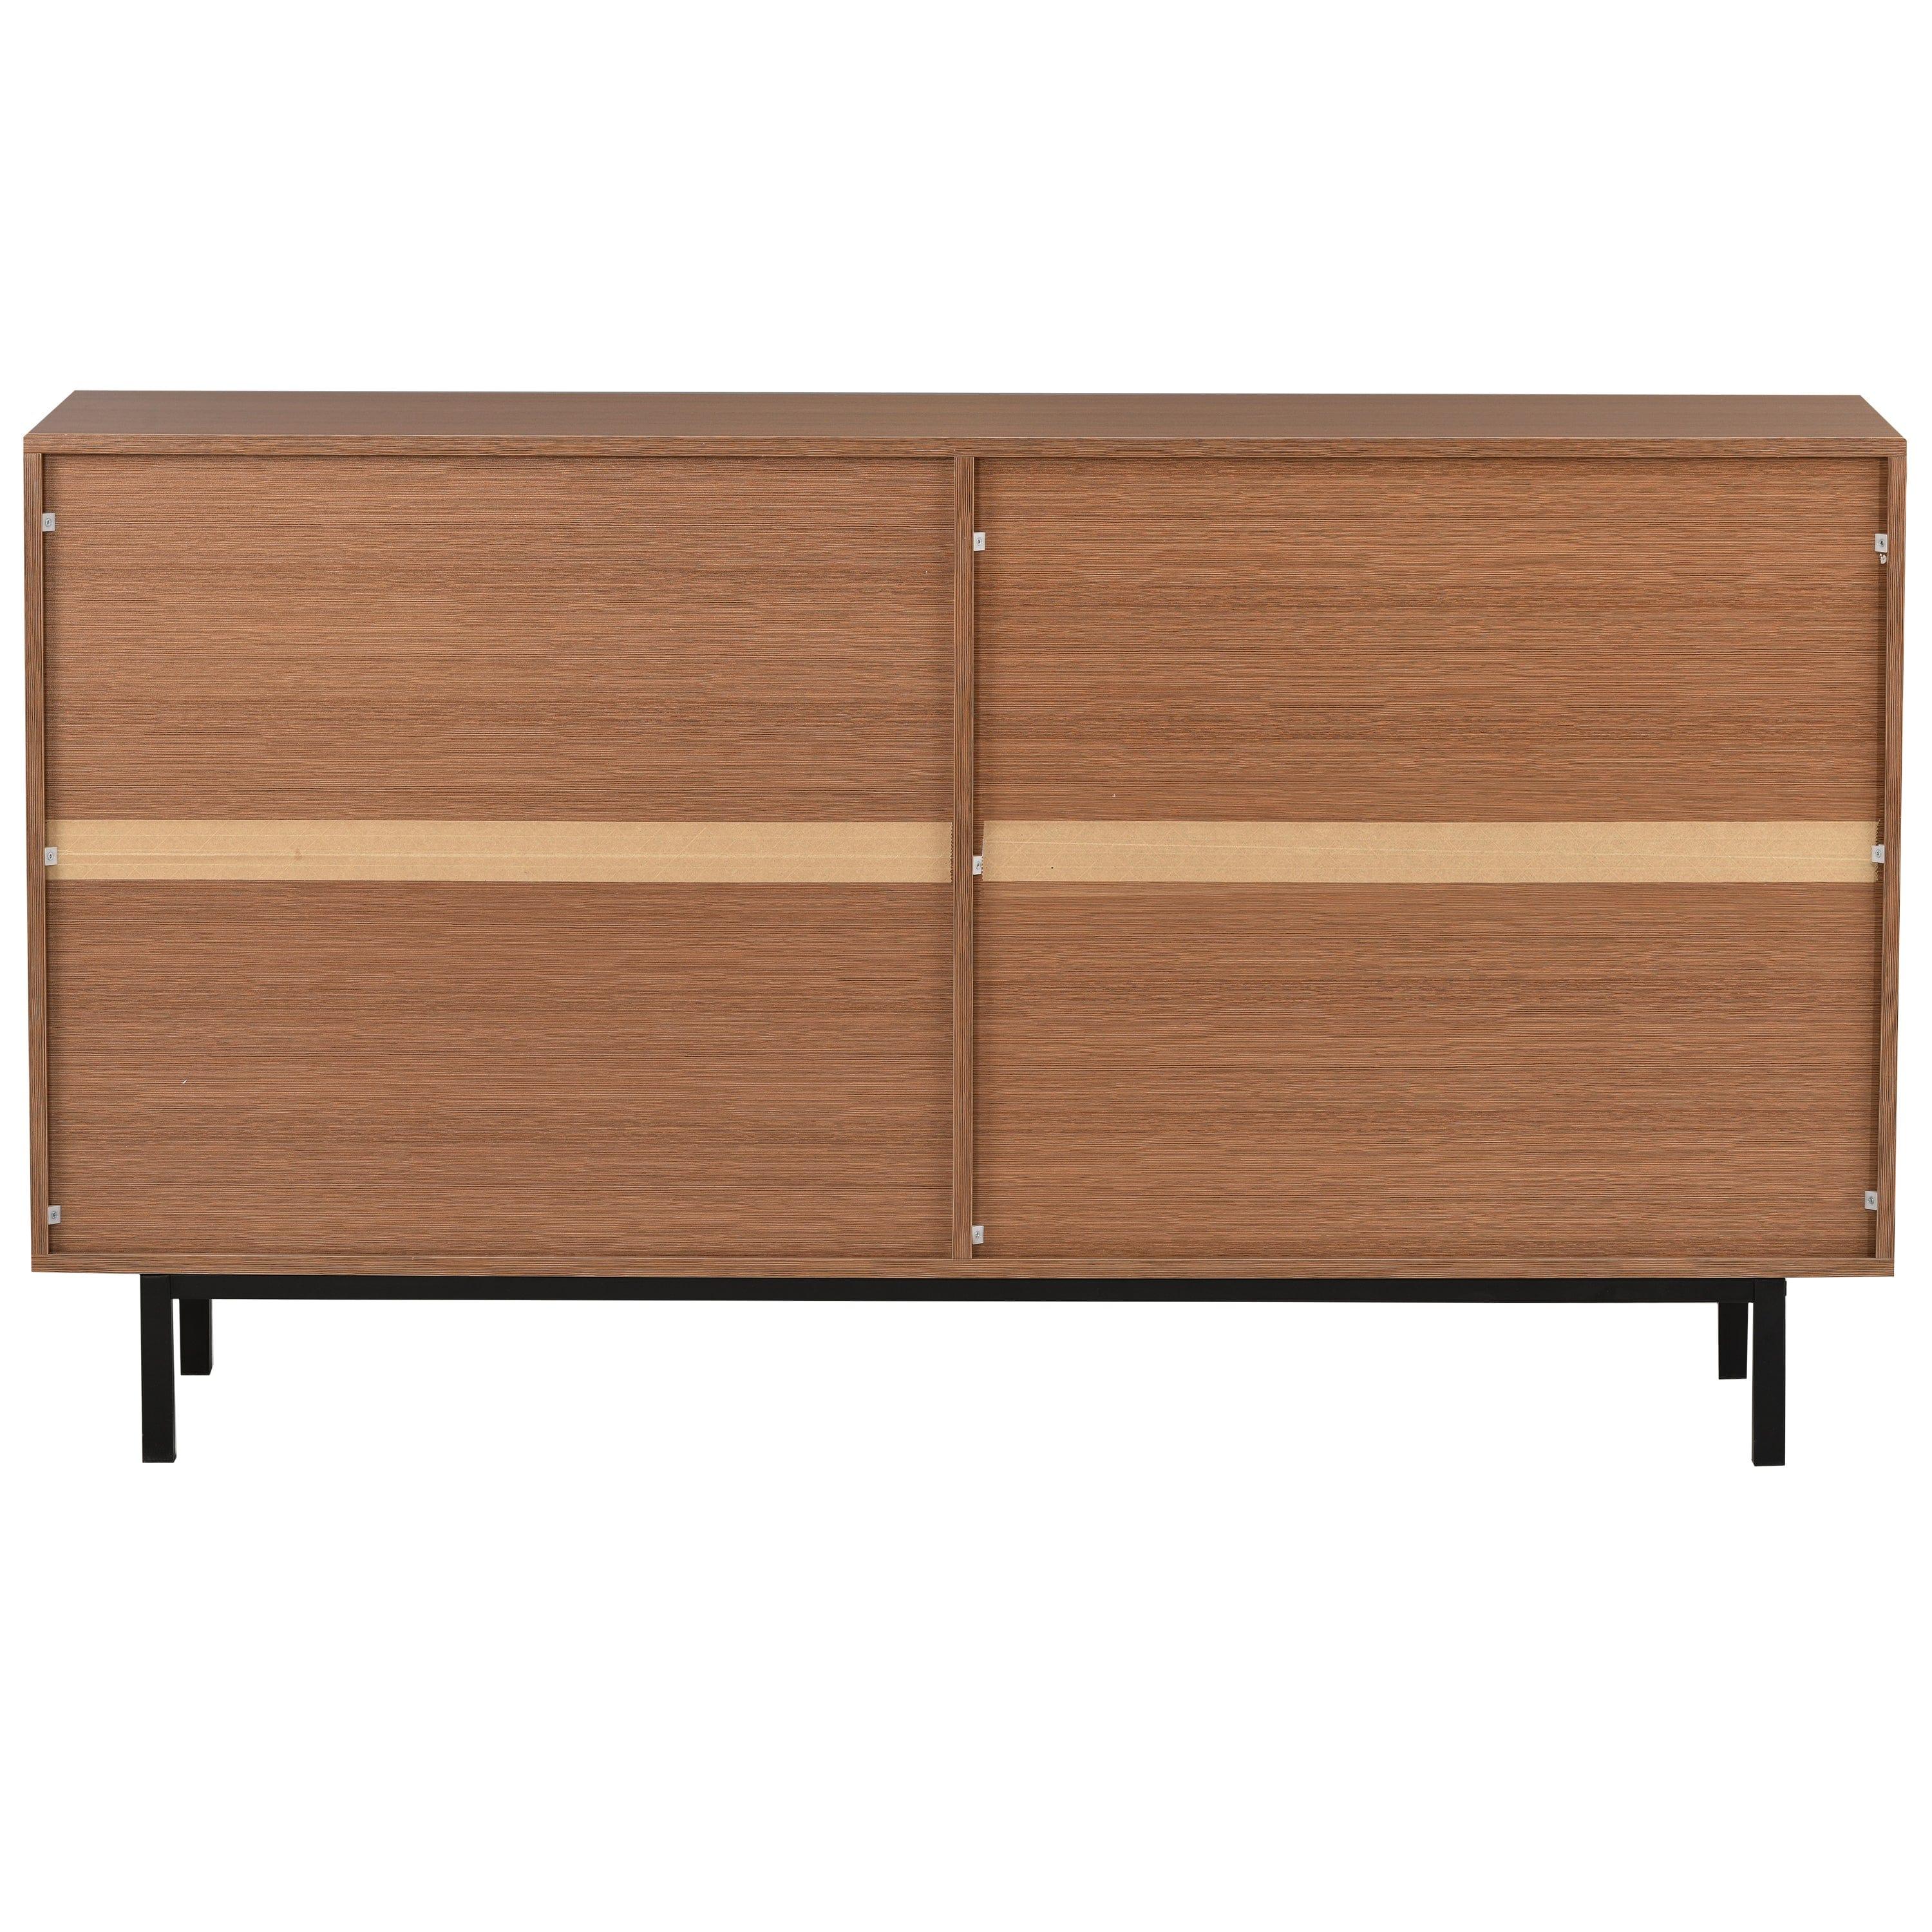 Shop TREXM Contemporary Style Sideboard Large Storage Space Console Table  with Metal Legs and Handles (Tan) Mademoiselle Home Decor